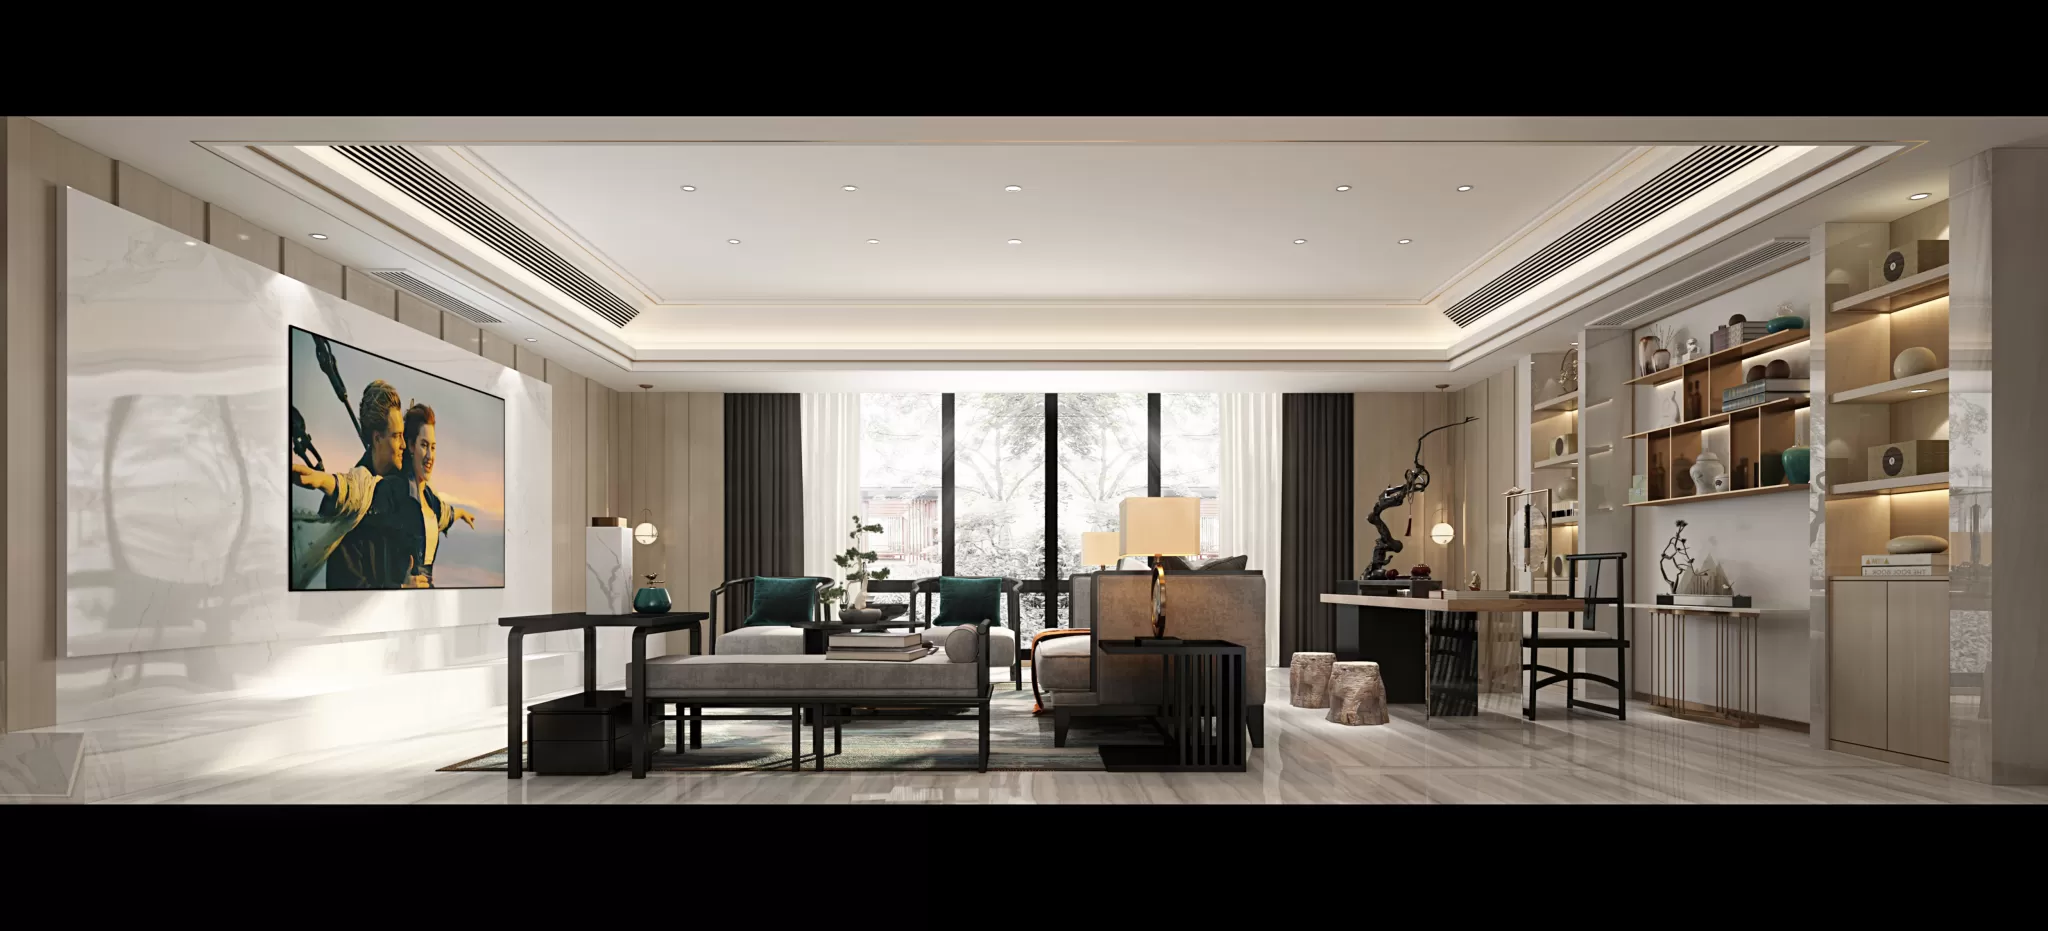 DESMOD INTERIOR 2021 (VRAY) – 4. LIVING ROOM – CHINESE – 46